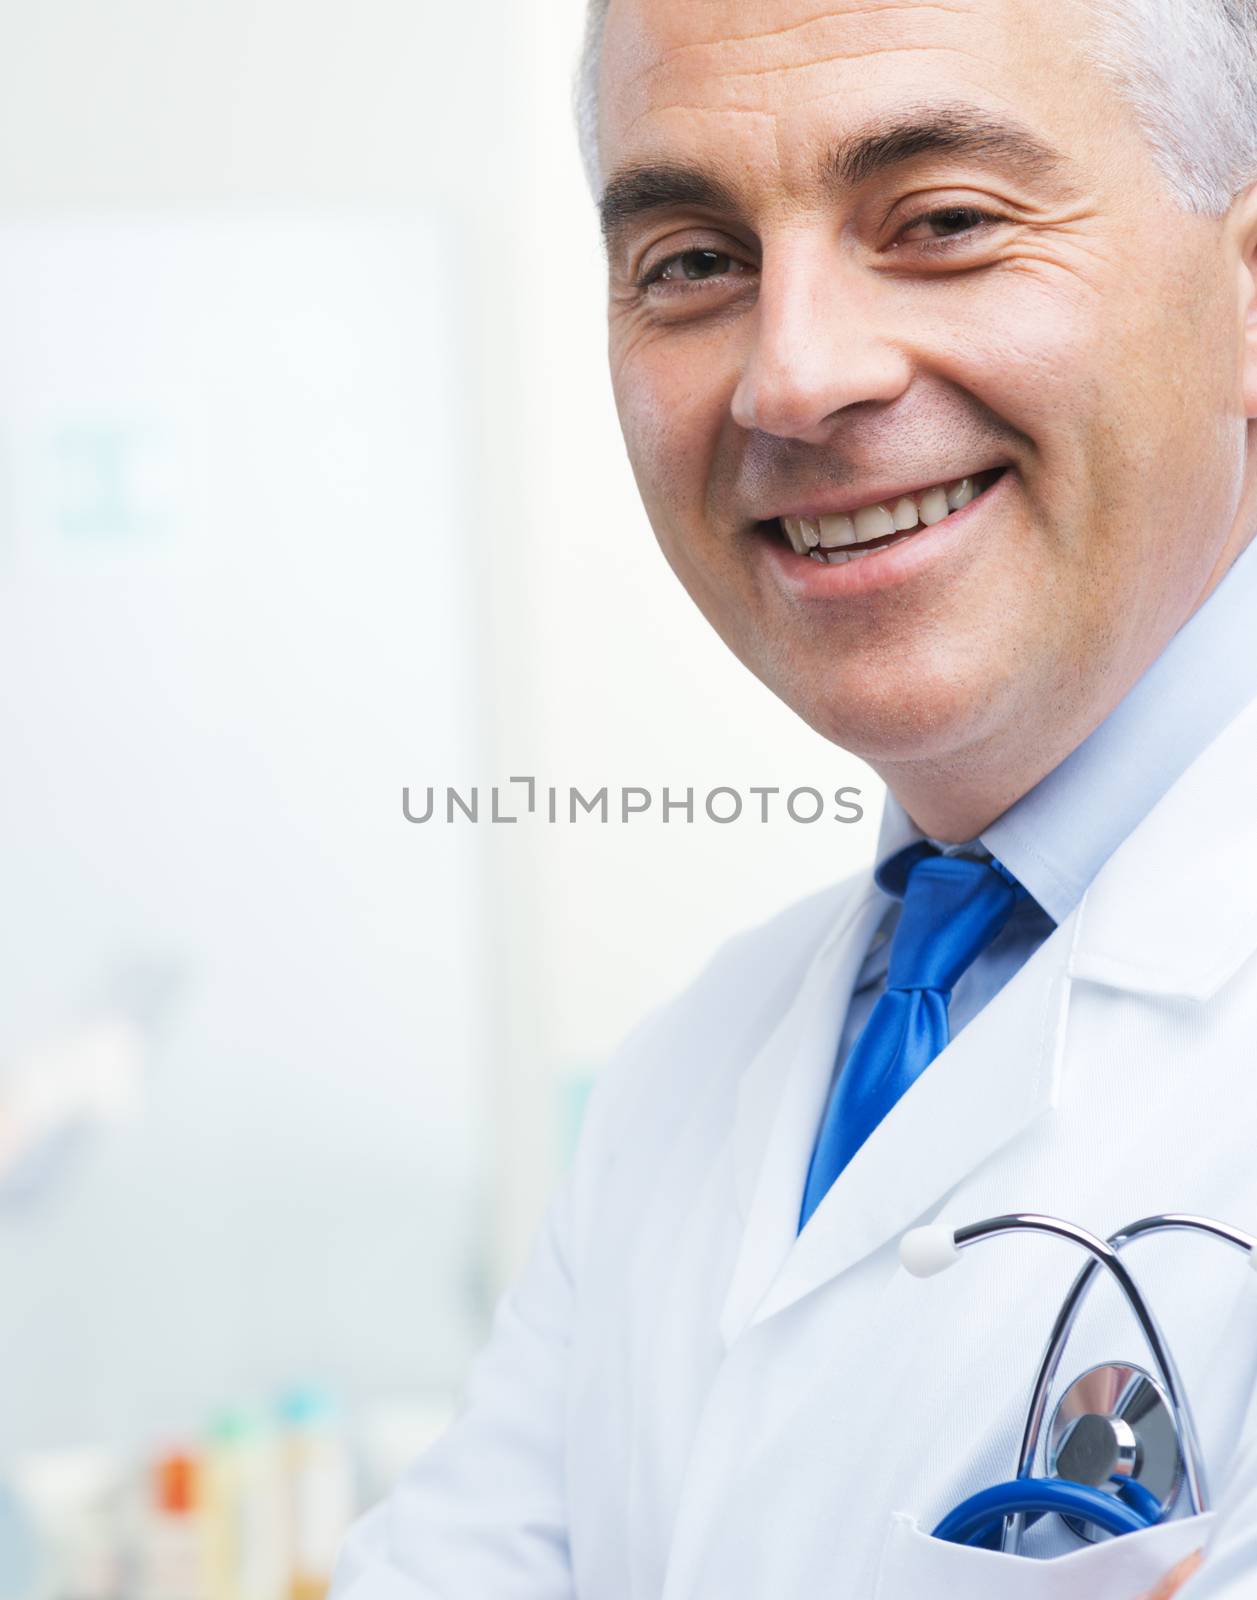 Handsome friendly doctor smiling and looking at camera.